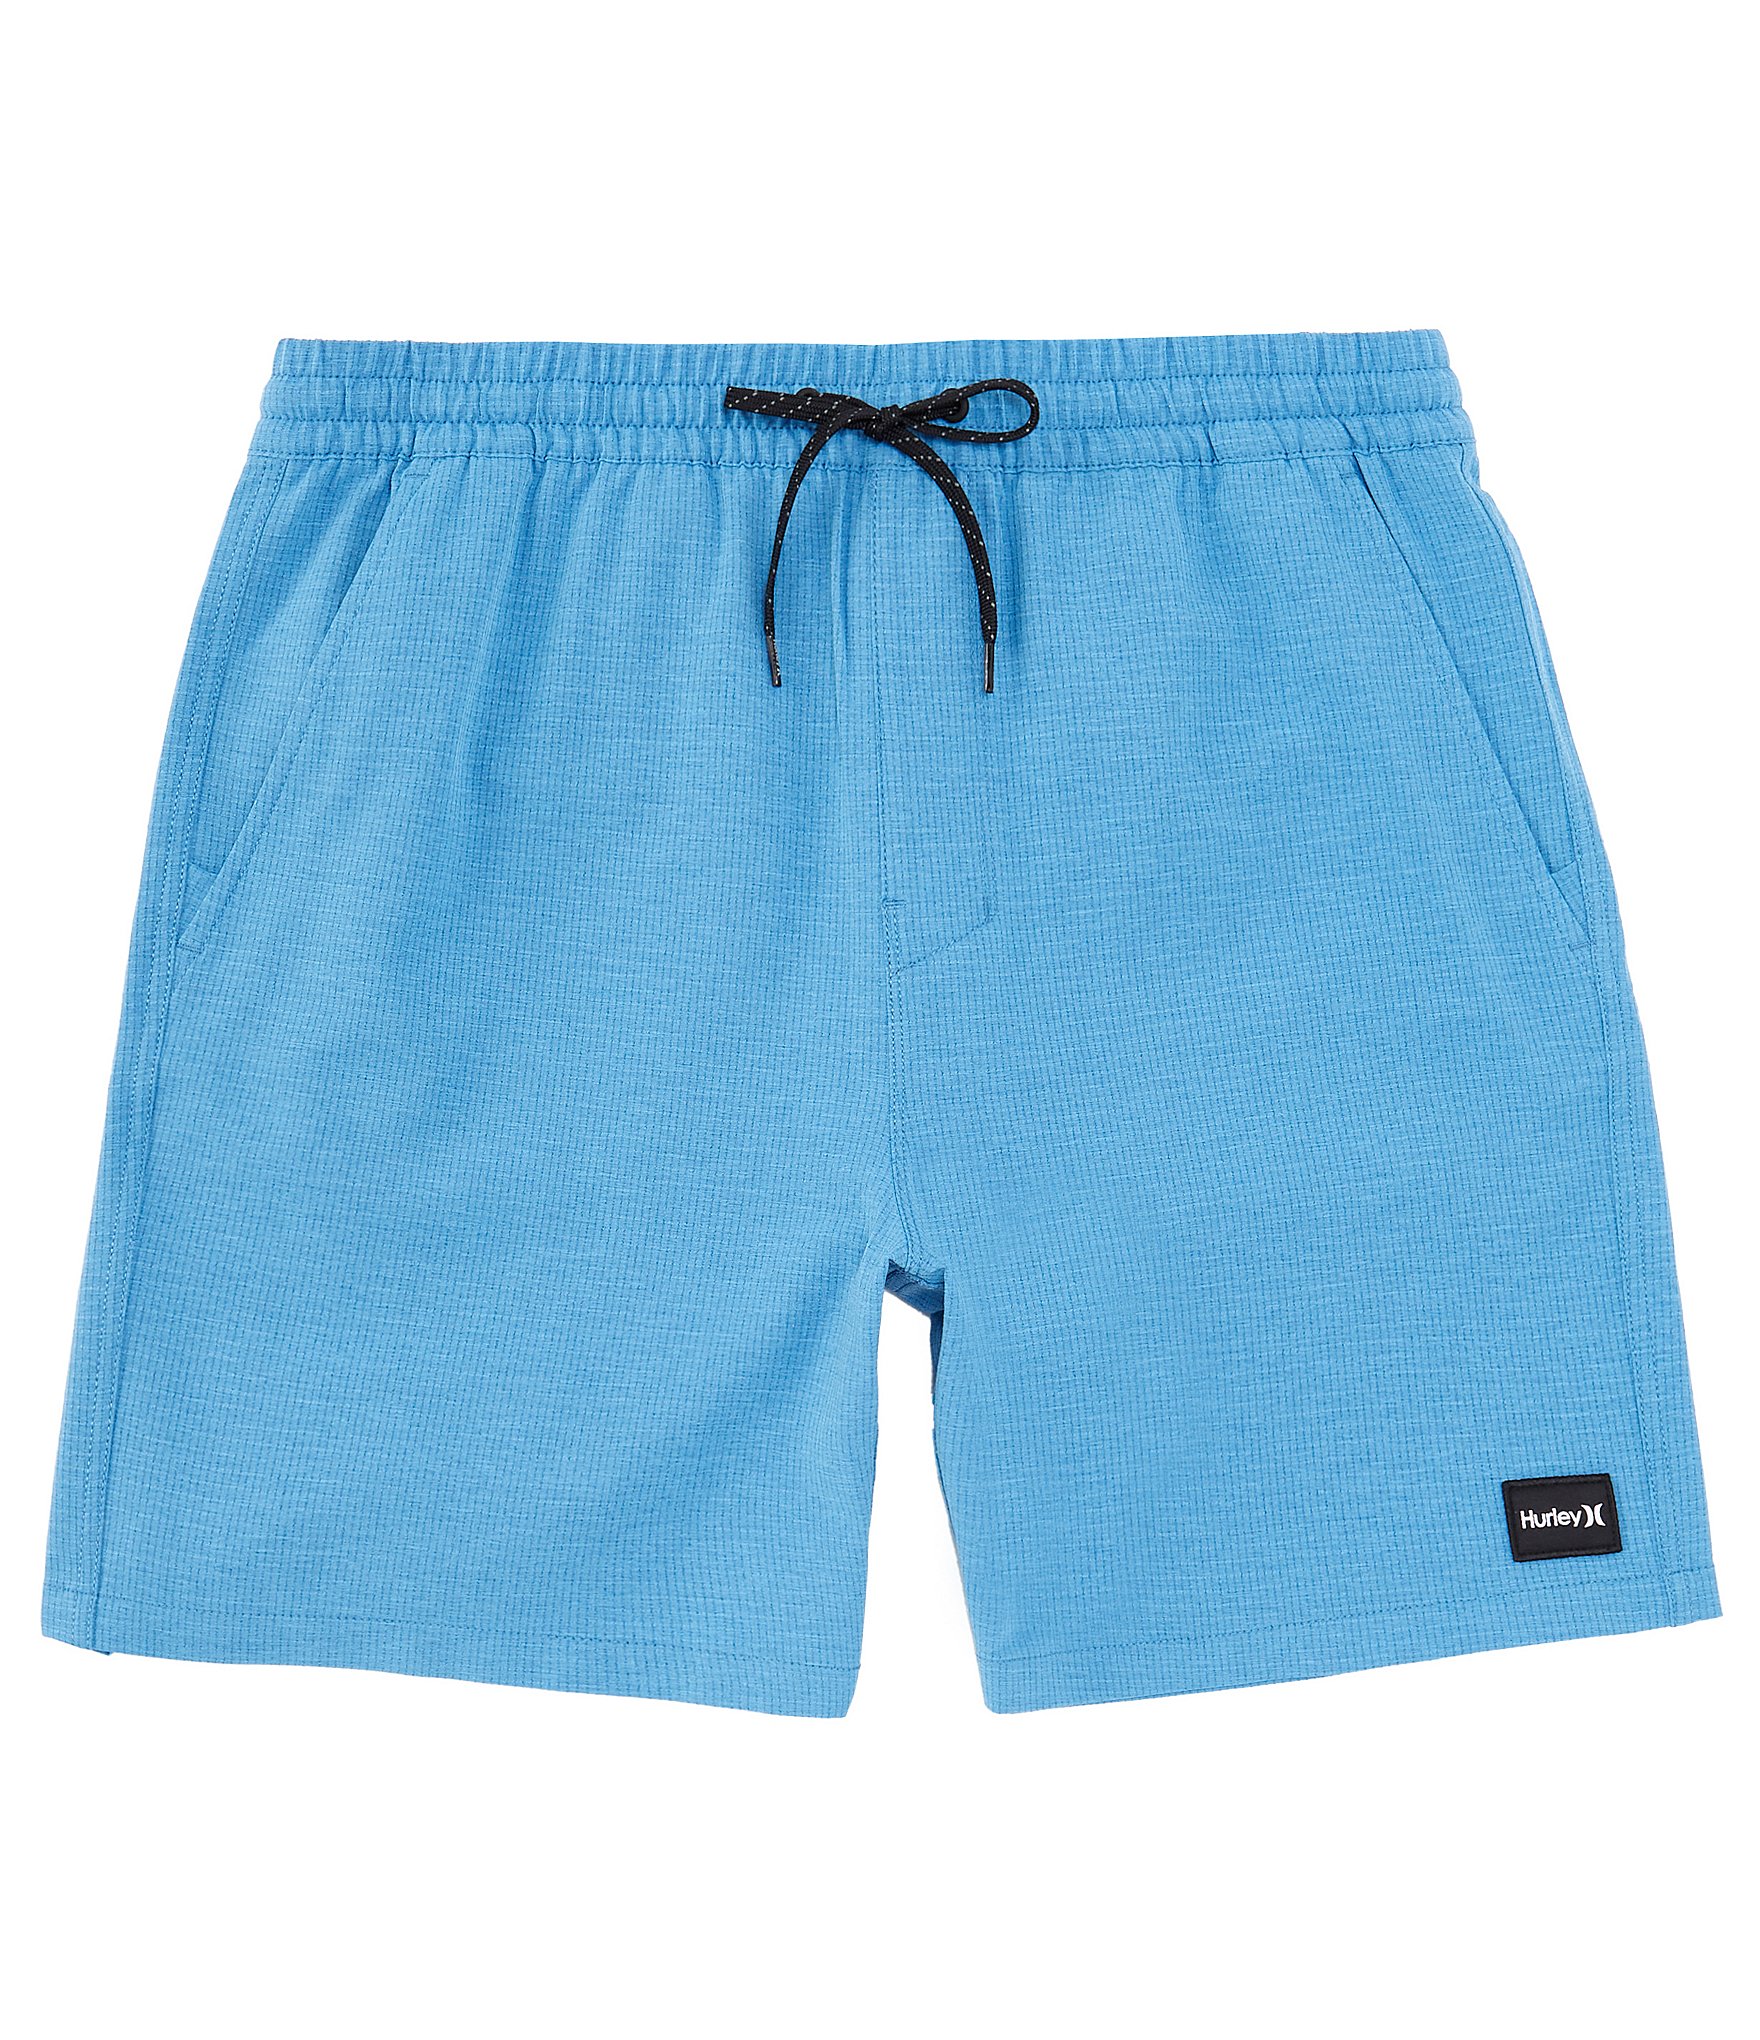 SAXX Betawave Two-In-One Solid 19 Outseam Board Shorts